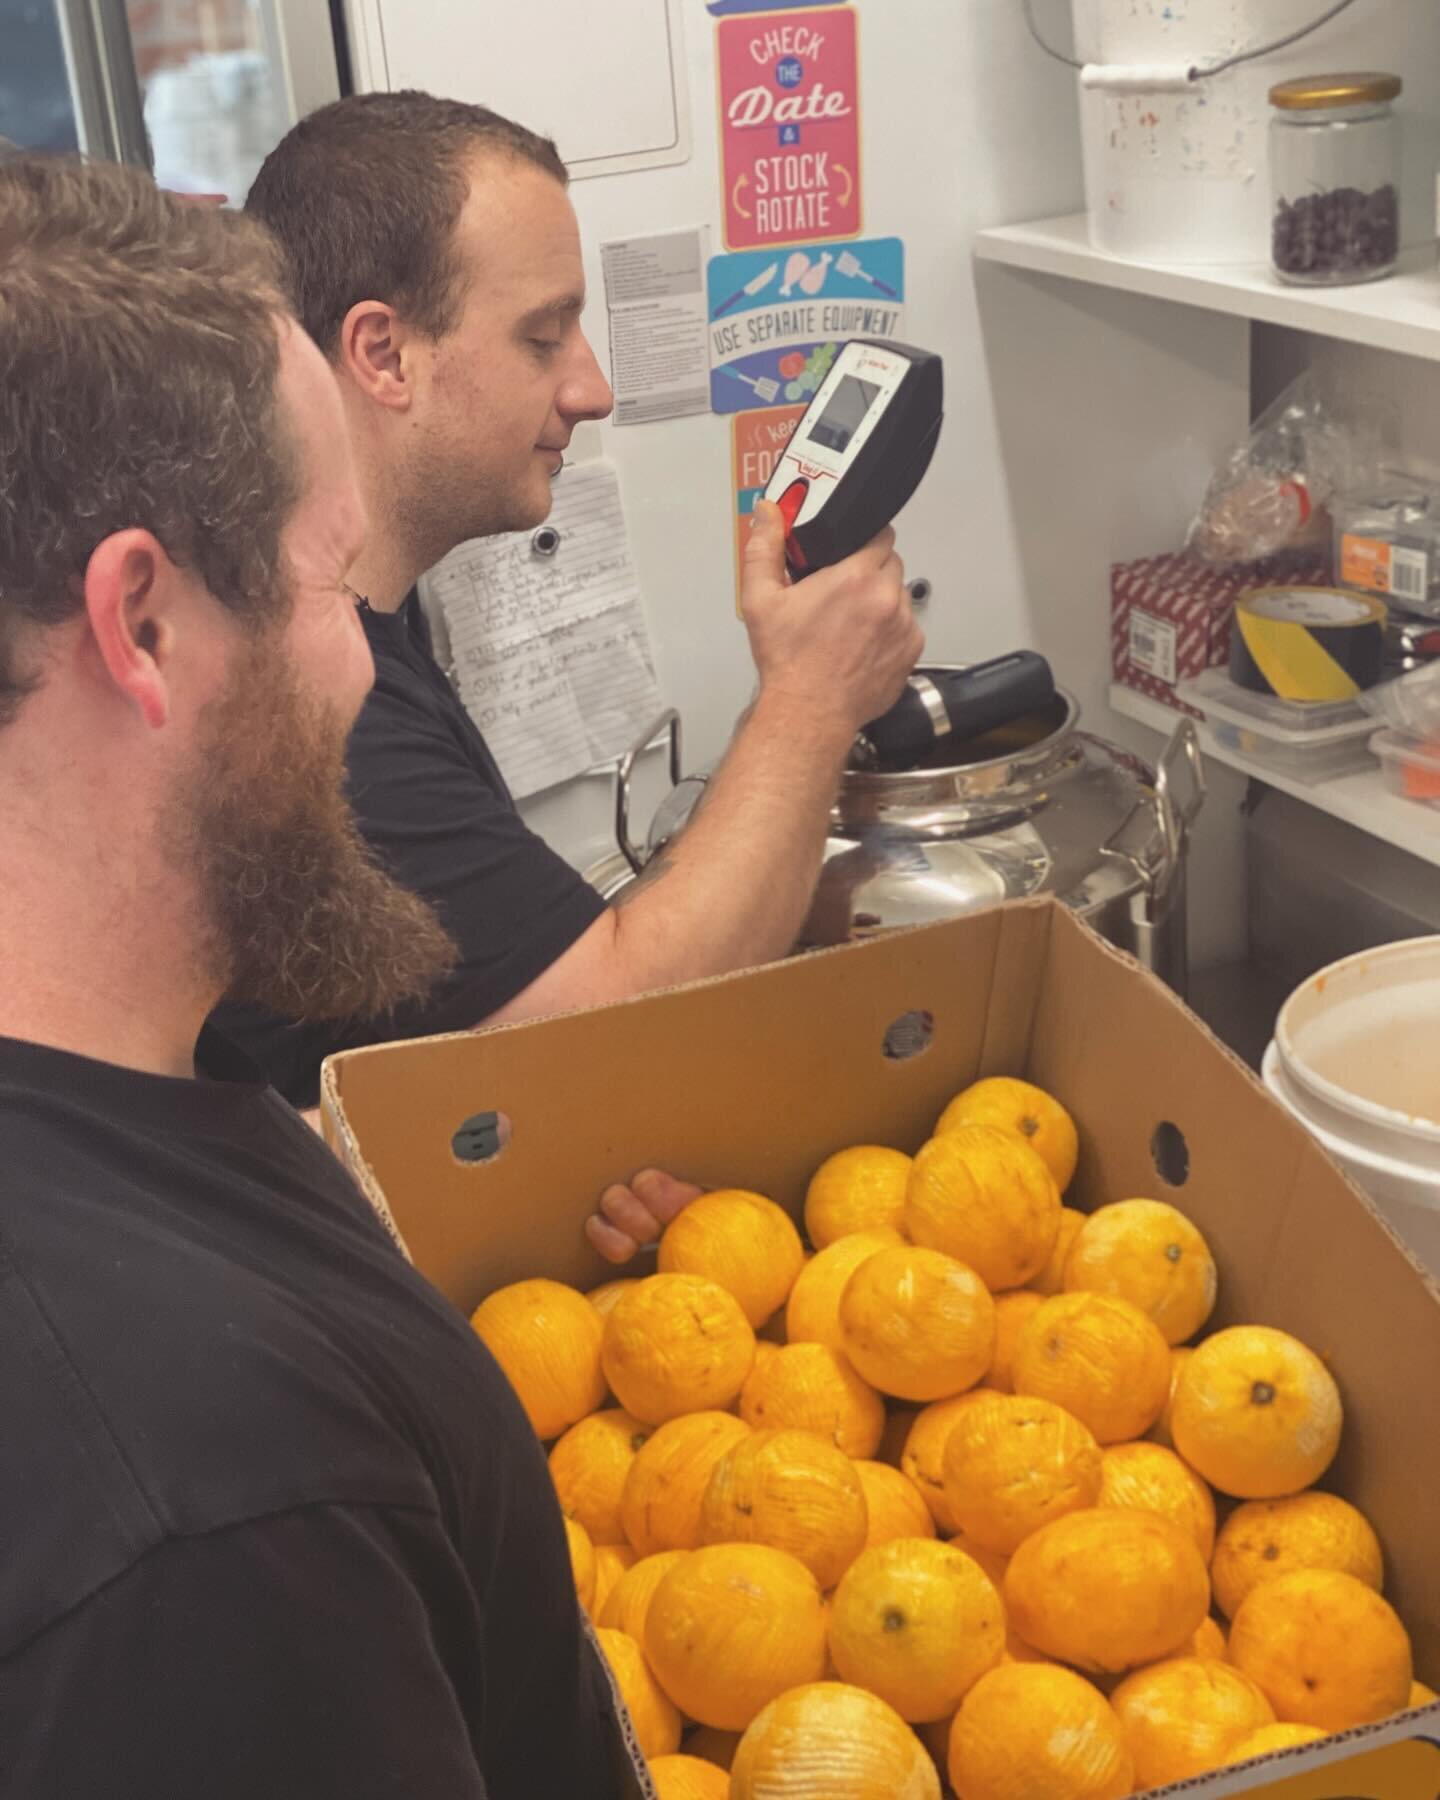 The &lsquo;A team&rsquo; of Bastien and Josh making our next batch of Arancello. Delicious orange digestivo. Made with our unique bread-based alcohol and the zest from beautiful, organically grown, Bay of Plenty oranges, it&rsquo;s one of a kind. Del